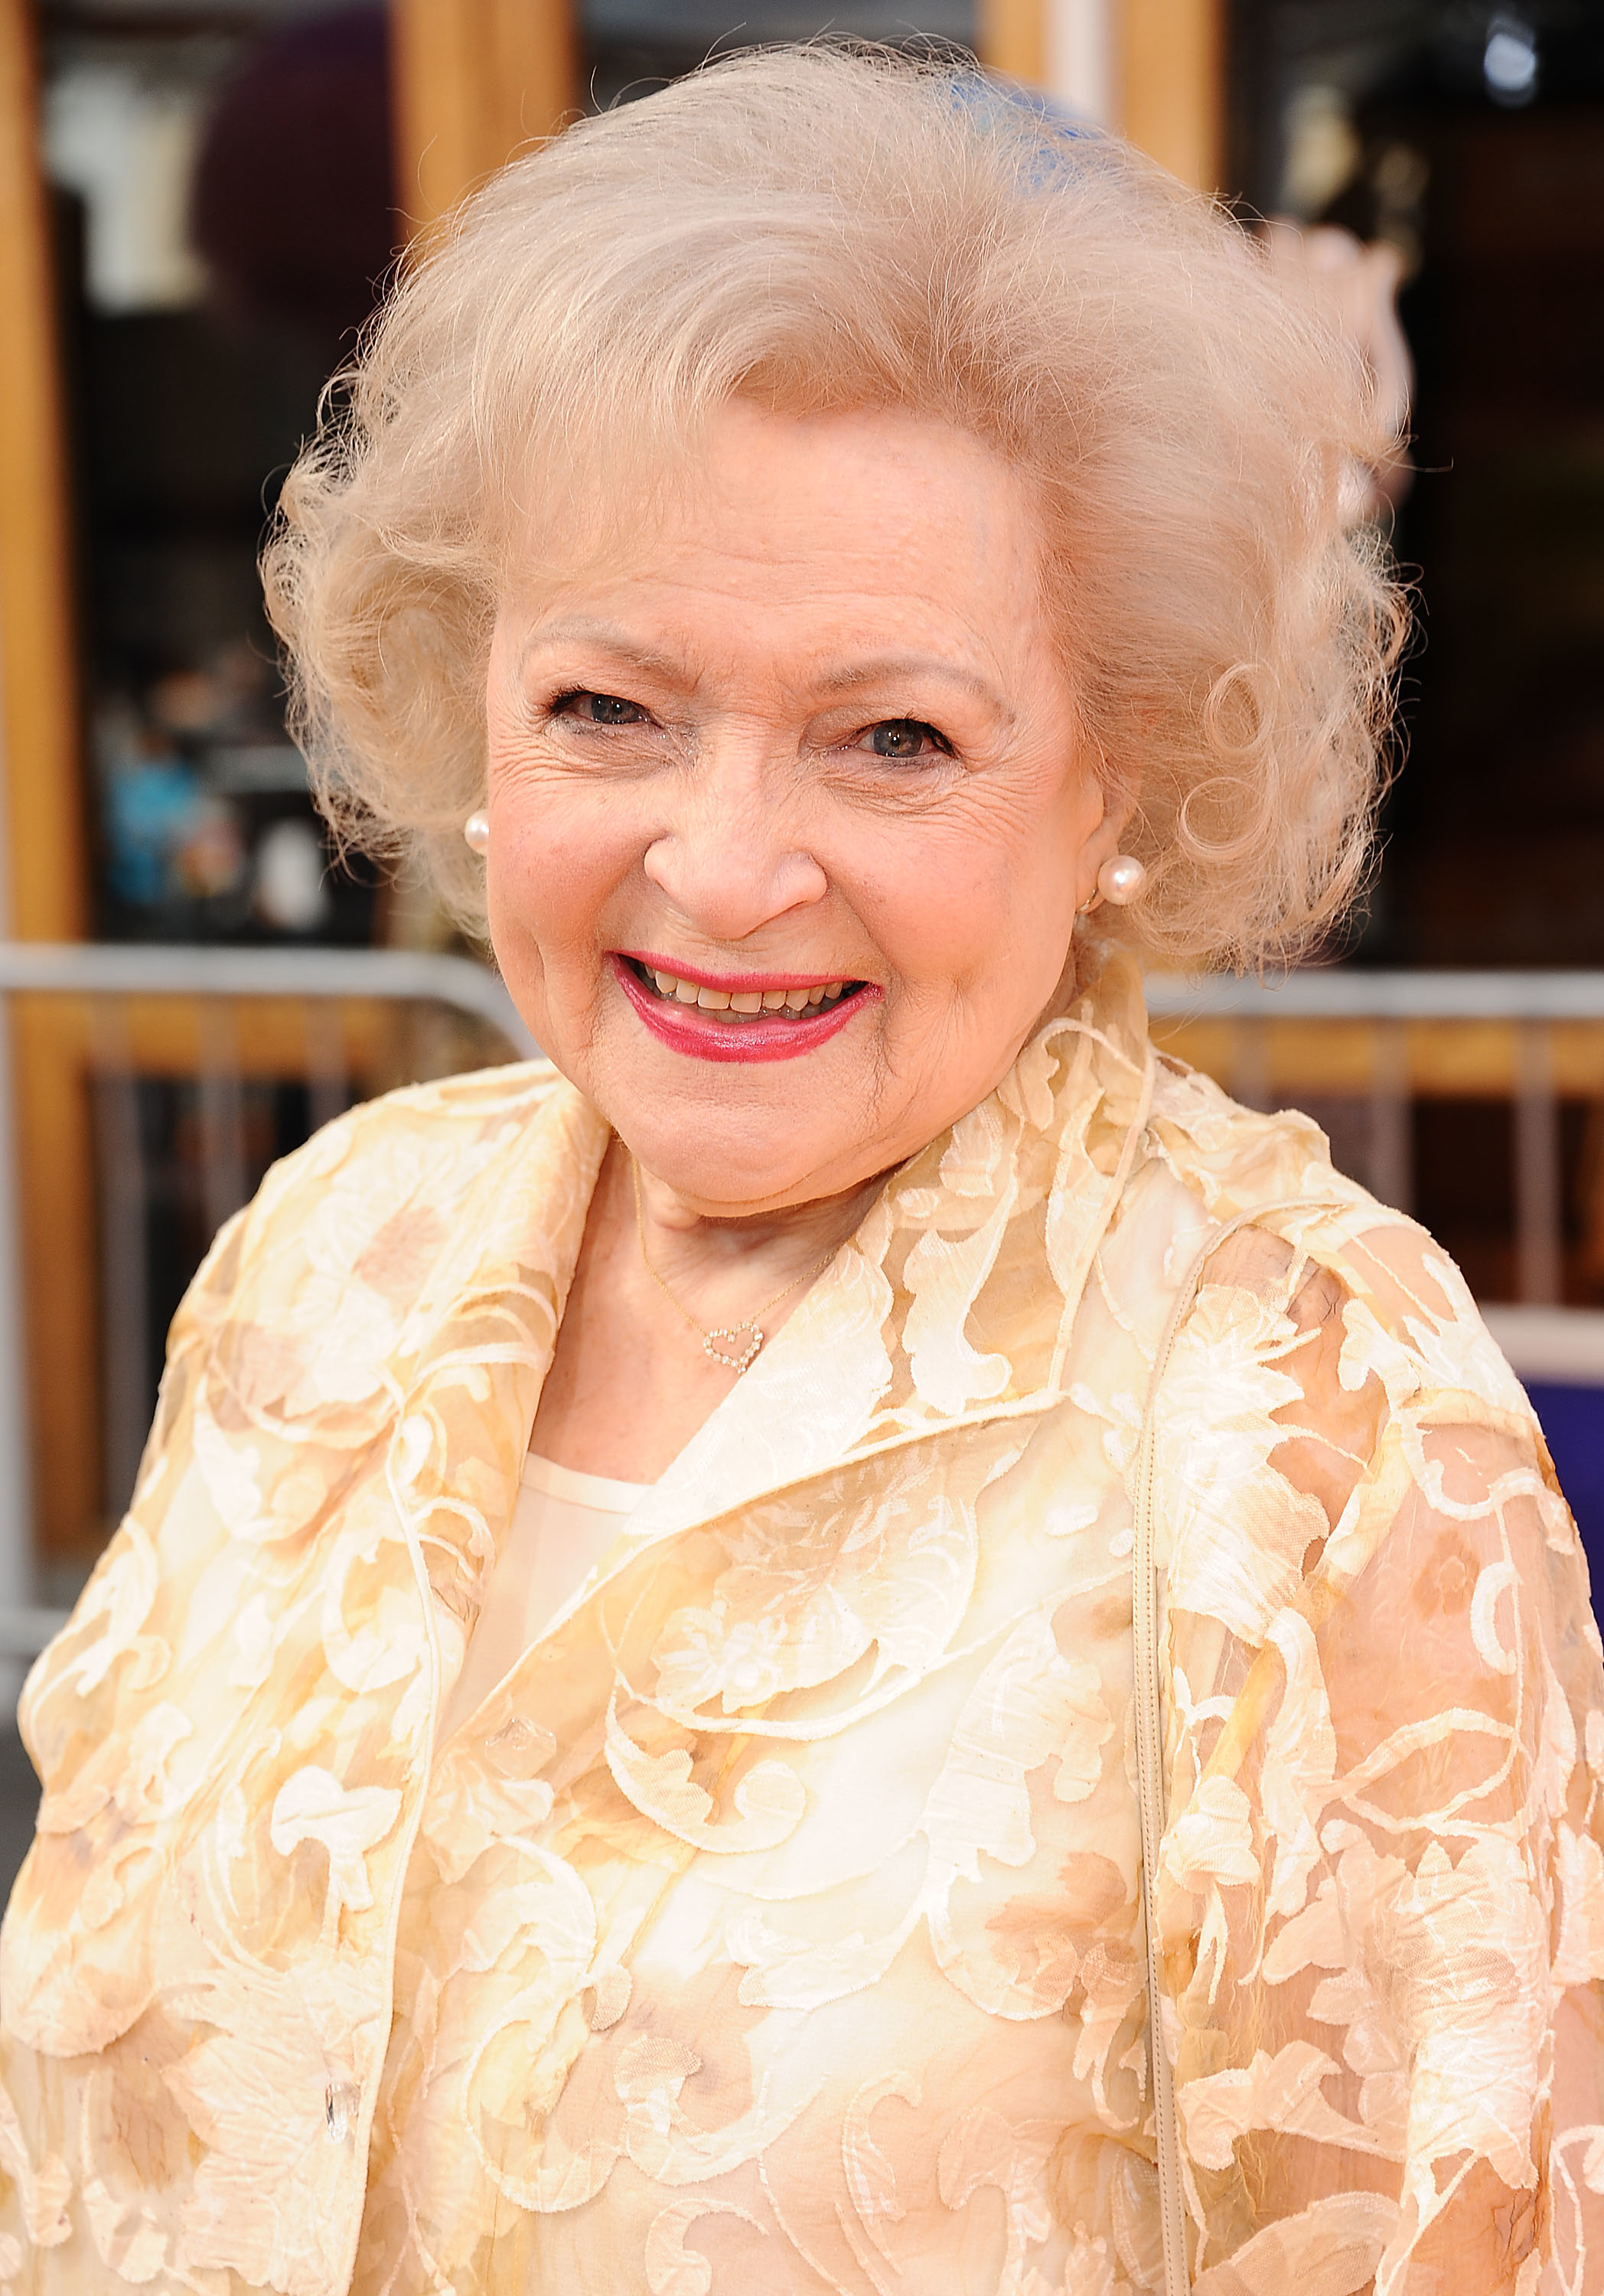 Betty White smiling, wearing a floral-patterned jacket with pearl earrings at an event